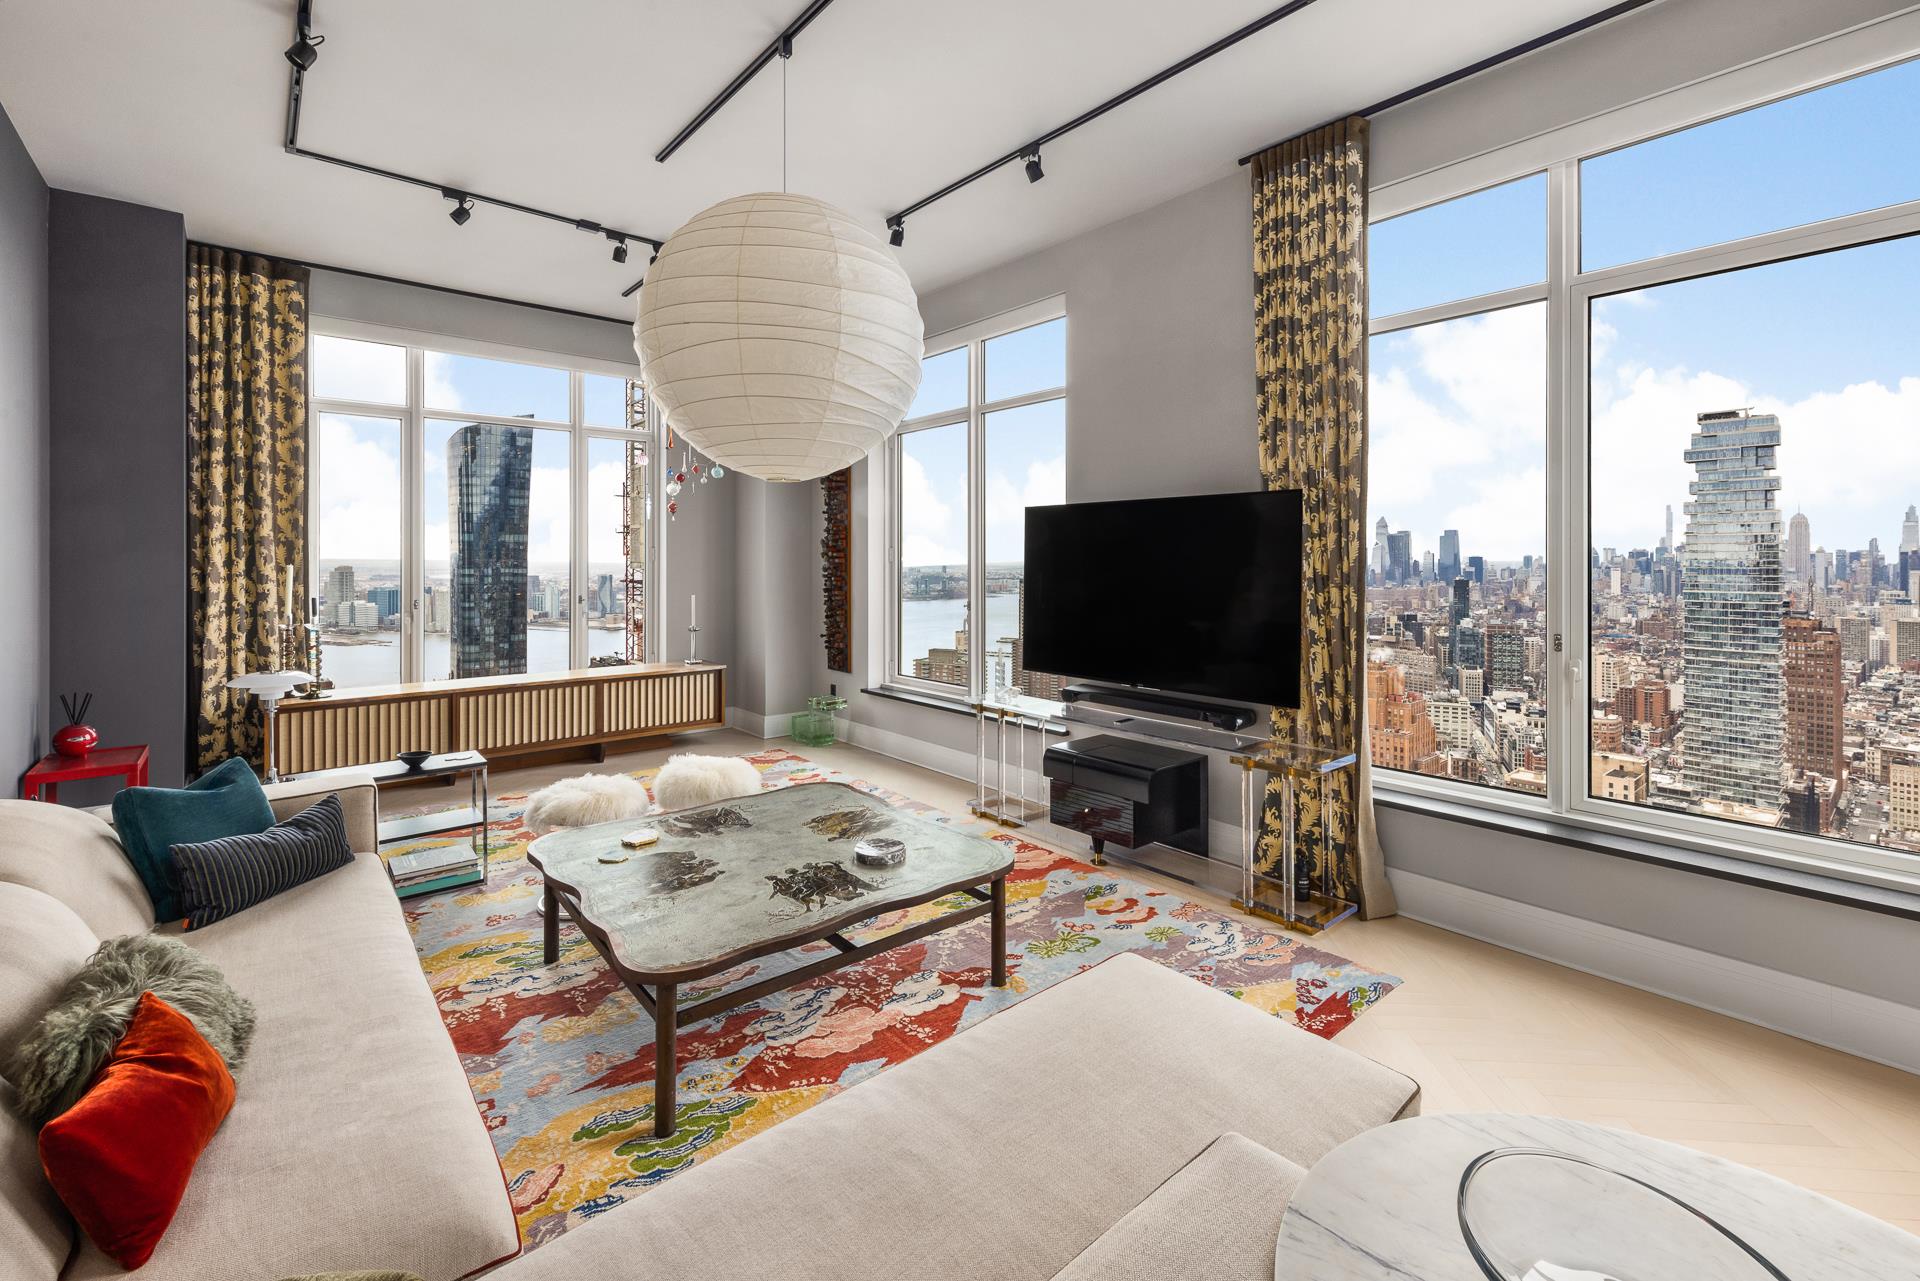 30 Park Place 59A, Tribeca, Downtown, NYC - 4 Bedrooms  
4.5 Bathrooms  
7 Rooms - 